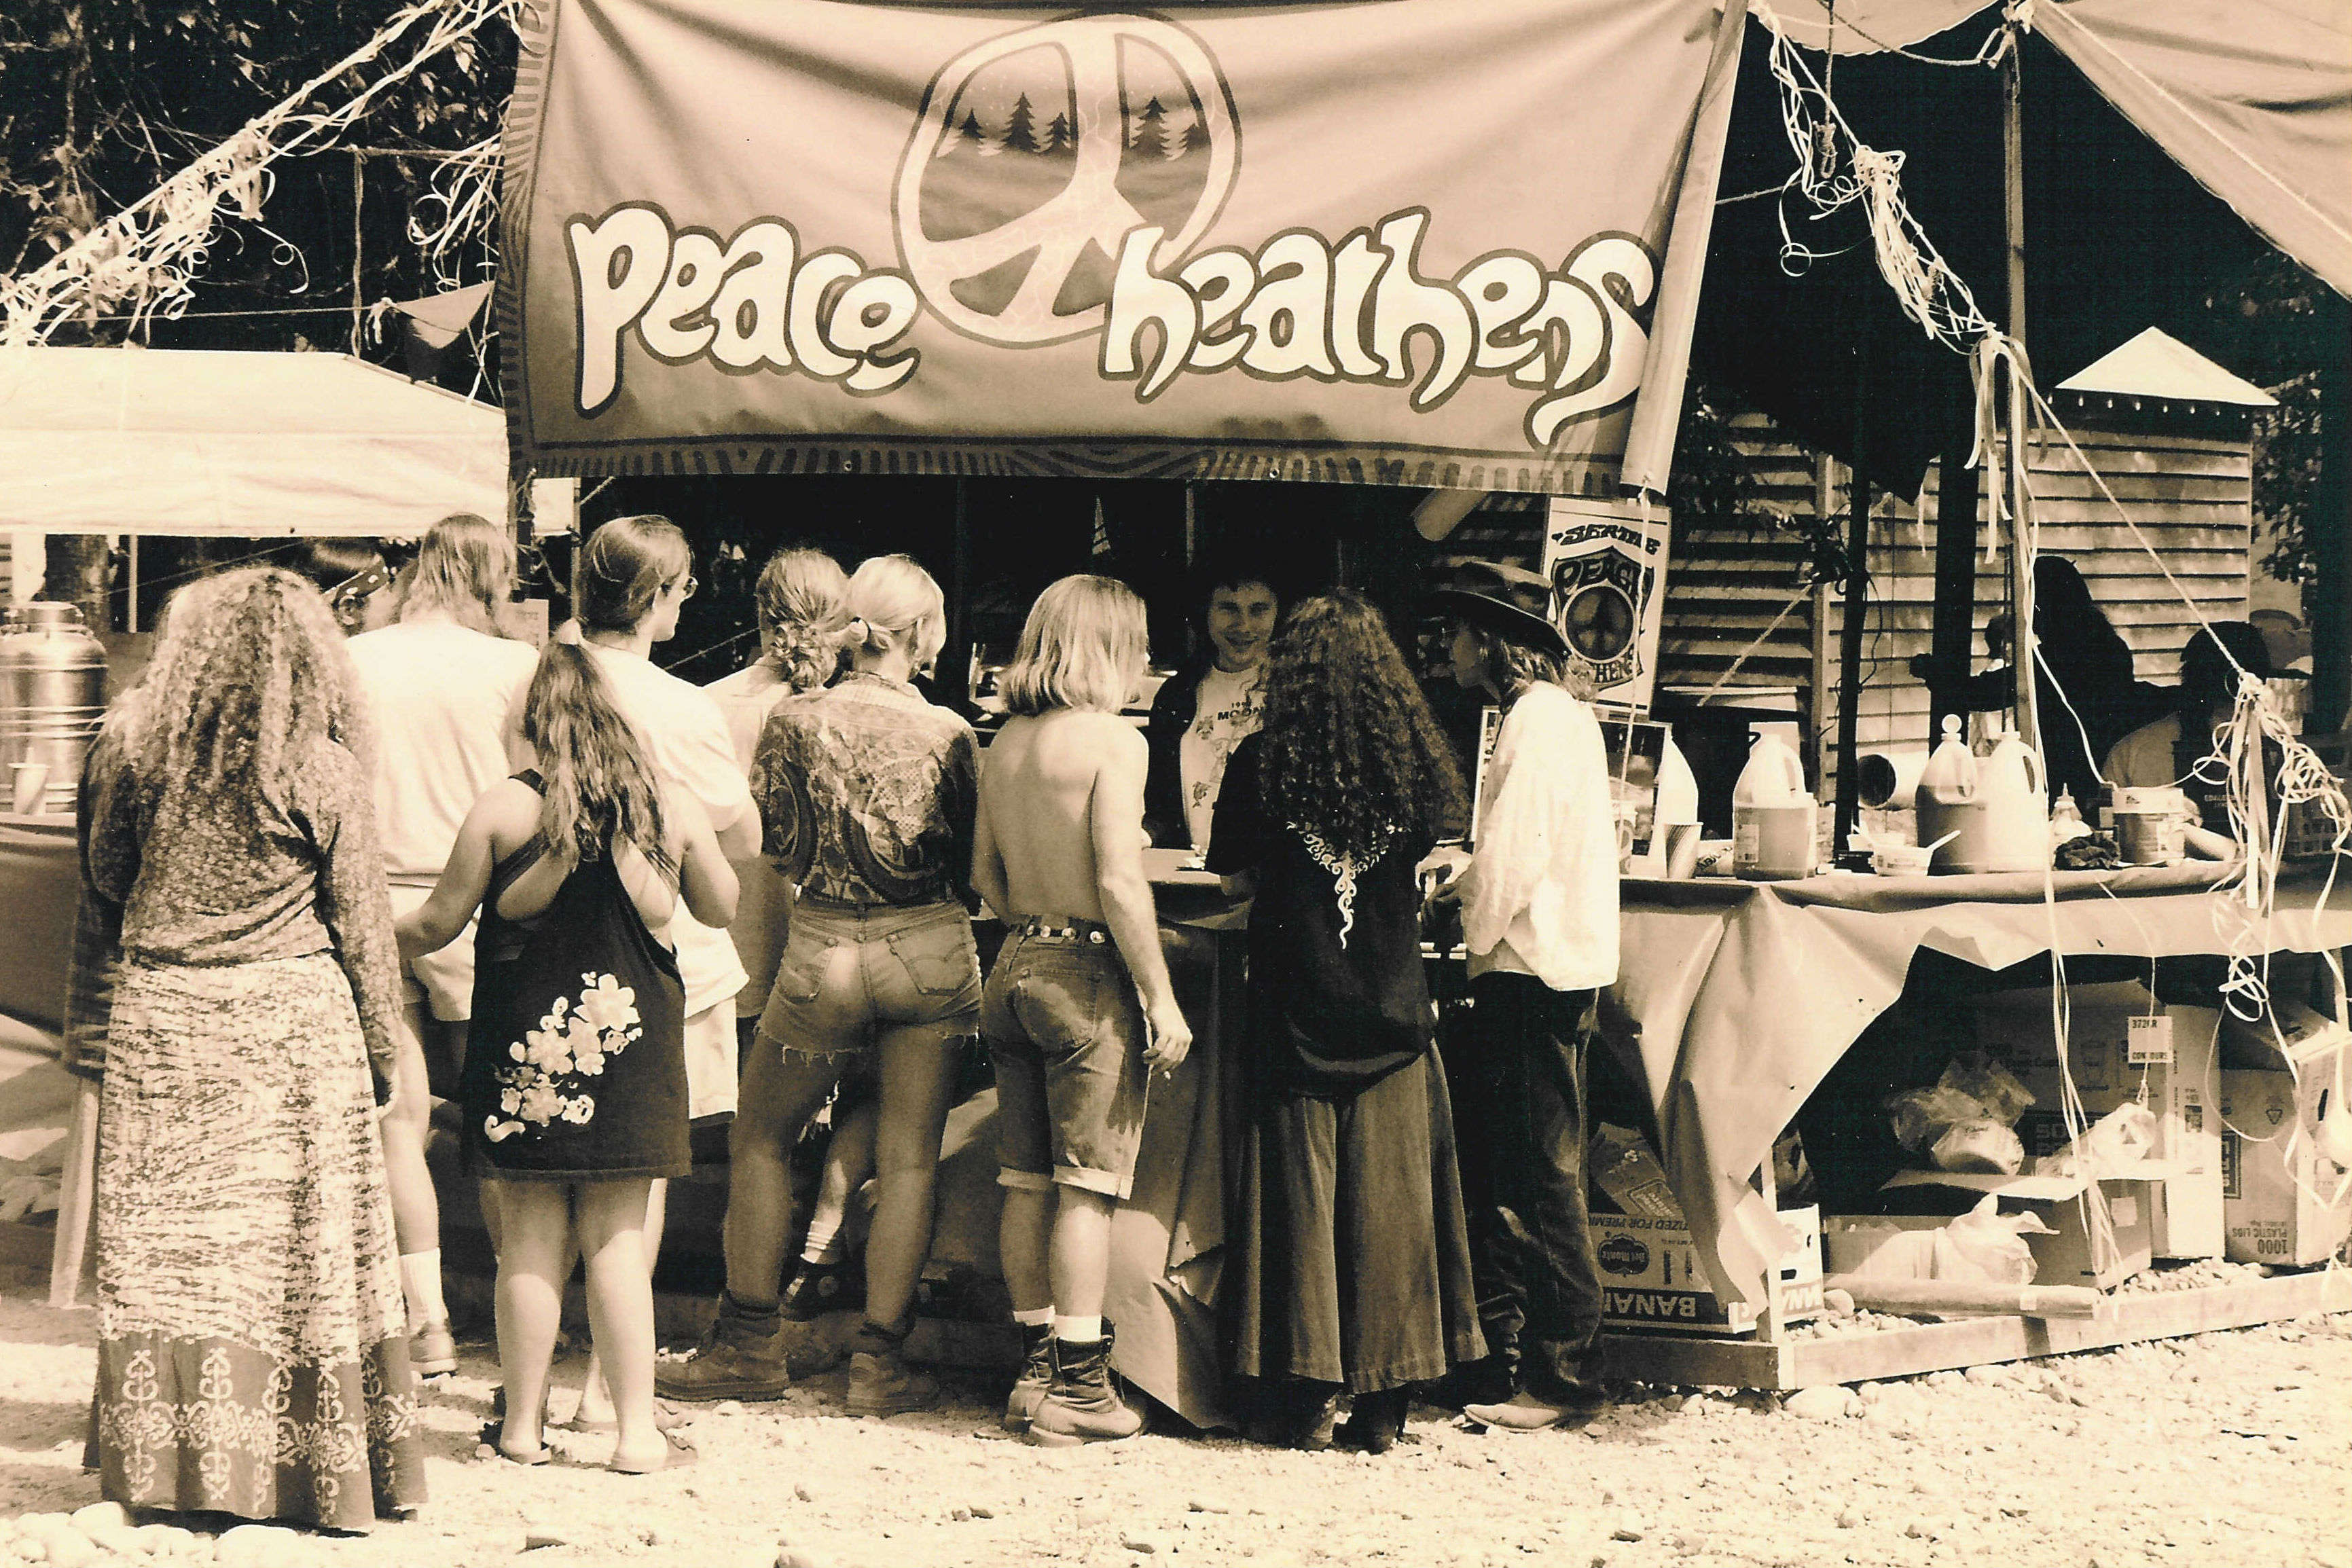 from the sixties hippies